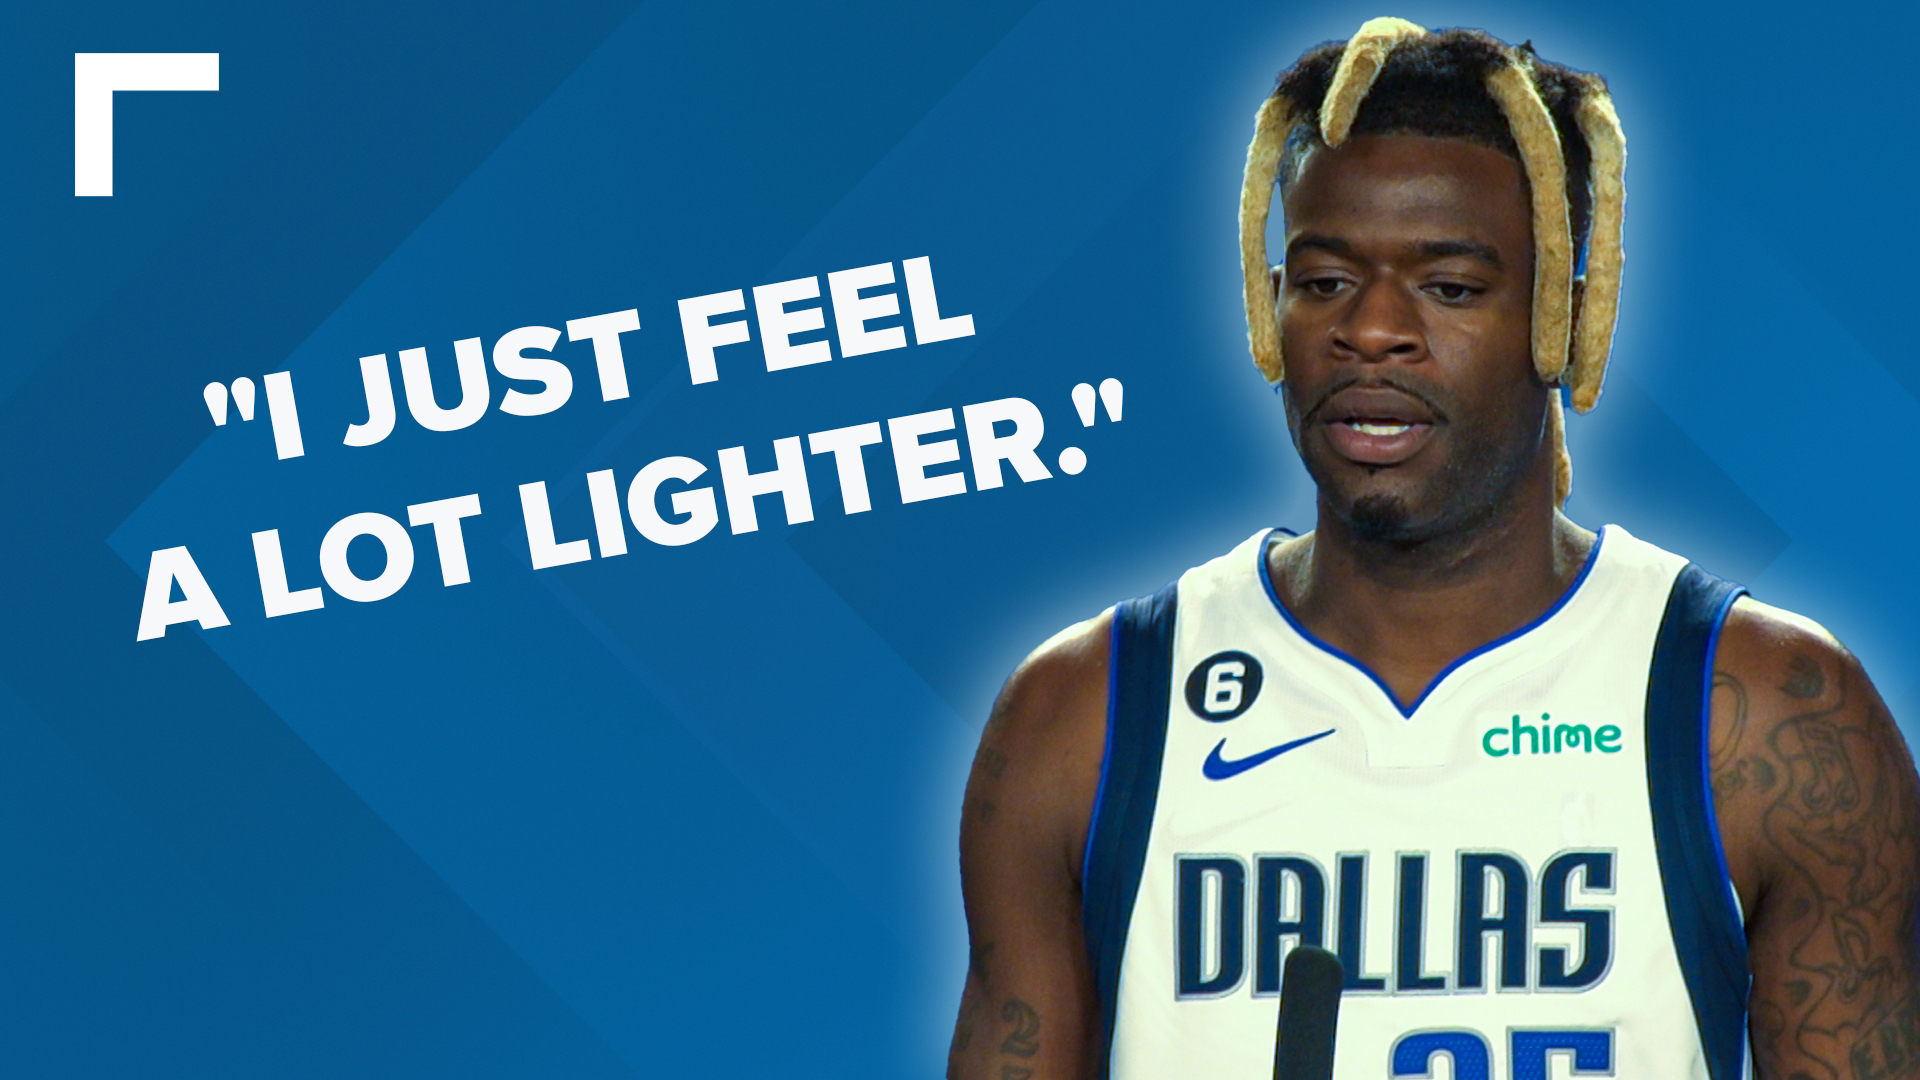 Reggie Bullock spoke on Monday during Mavs Media Day and talked about his expectations going into the 2022-2023 NBA season.